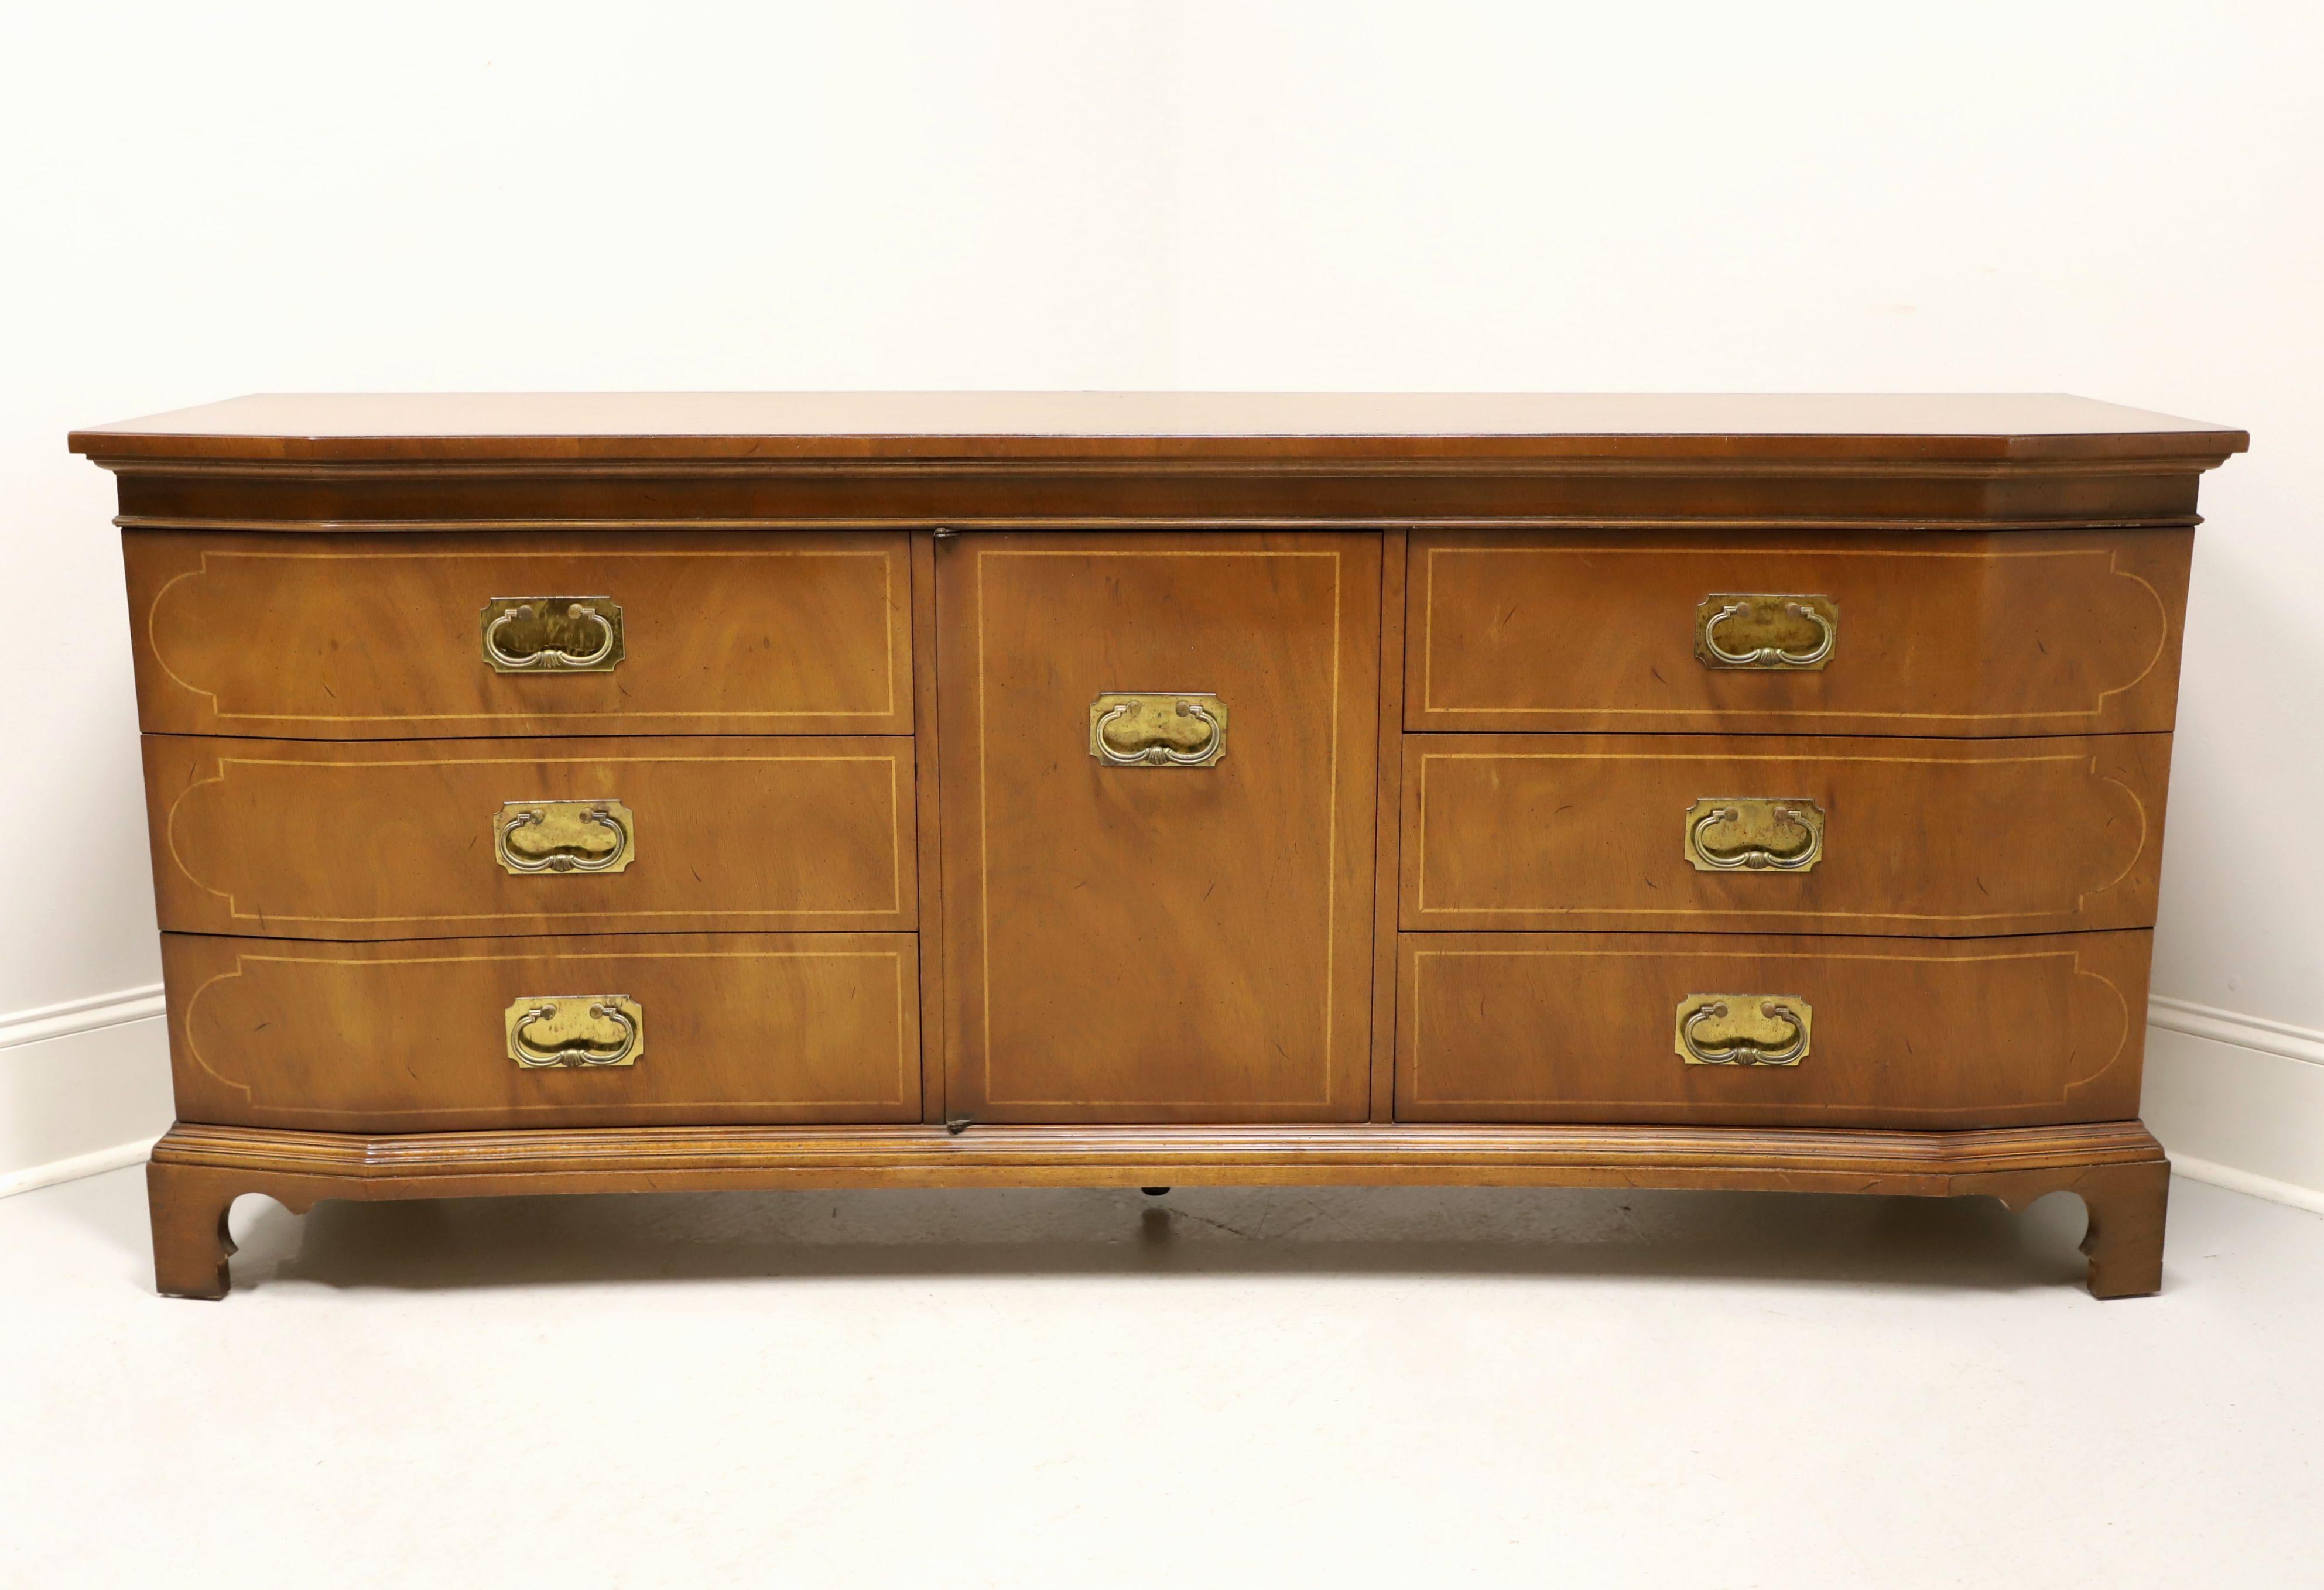 An Asian inspired triple dresser by Tomlinson Furniture. Walnut with a slightly distressed finish, brass hardware, slight serpentine front, string inlays to door & drawer fronts and bracket feet. Features nine drawers of dovetail construction, with